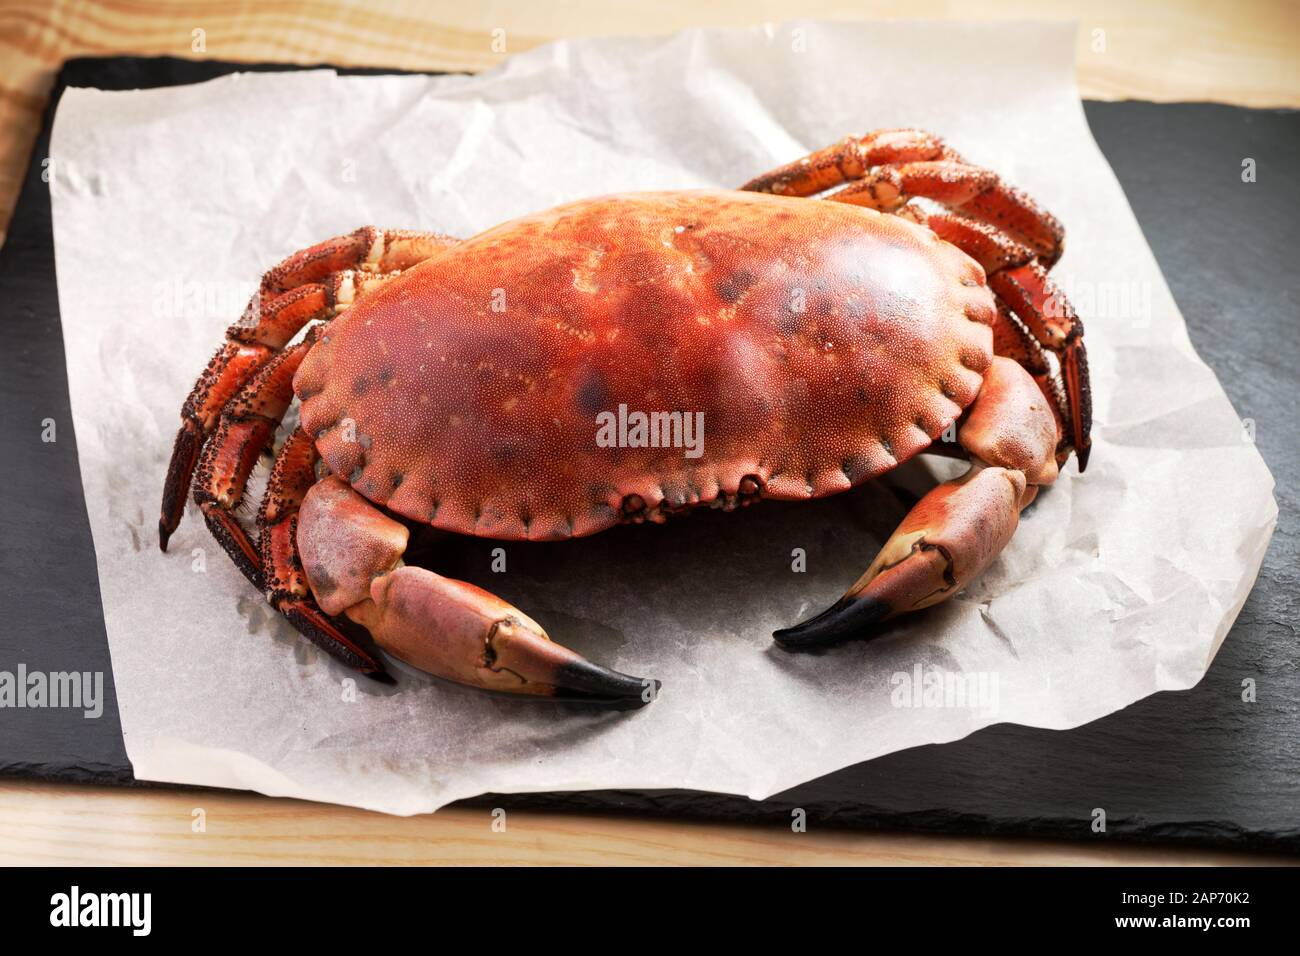 Prepared Swedish crab closeup on a wrapping paper Stock Photo